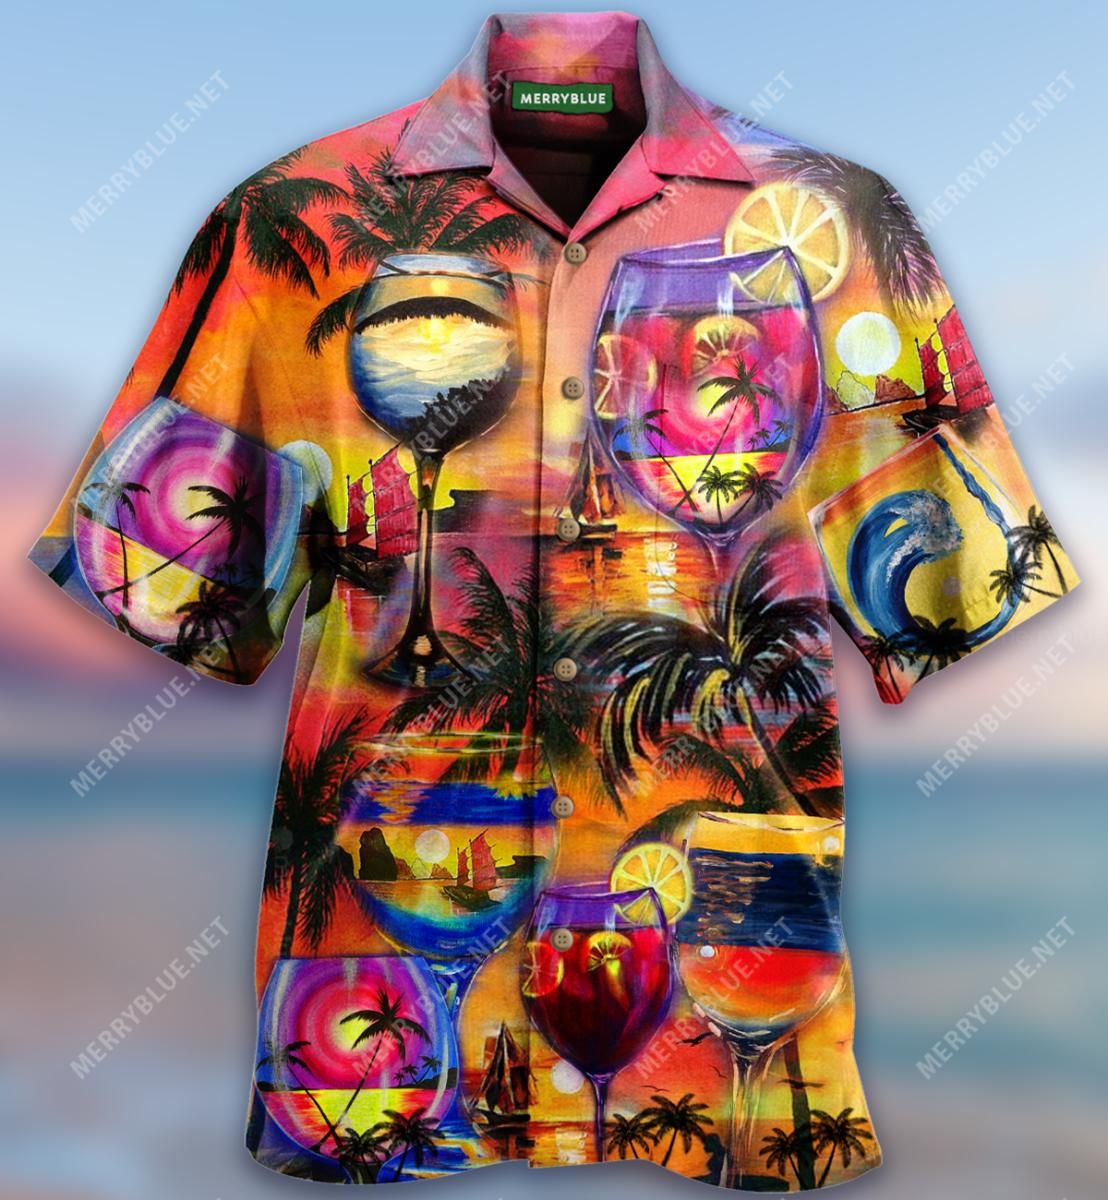 It'S Time For Wine And Aloha Hawaiian Shirt Colorful Short Sleeve Summer Beach Casual Shirt For Men And Women